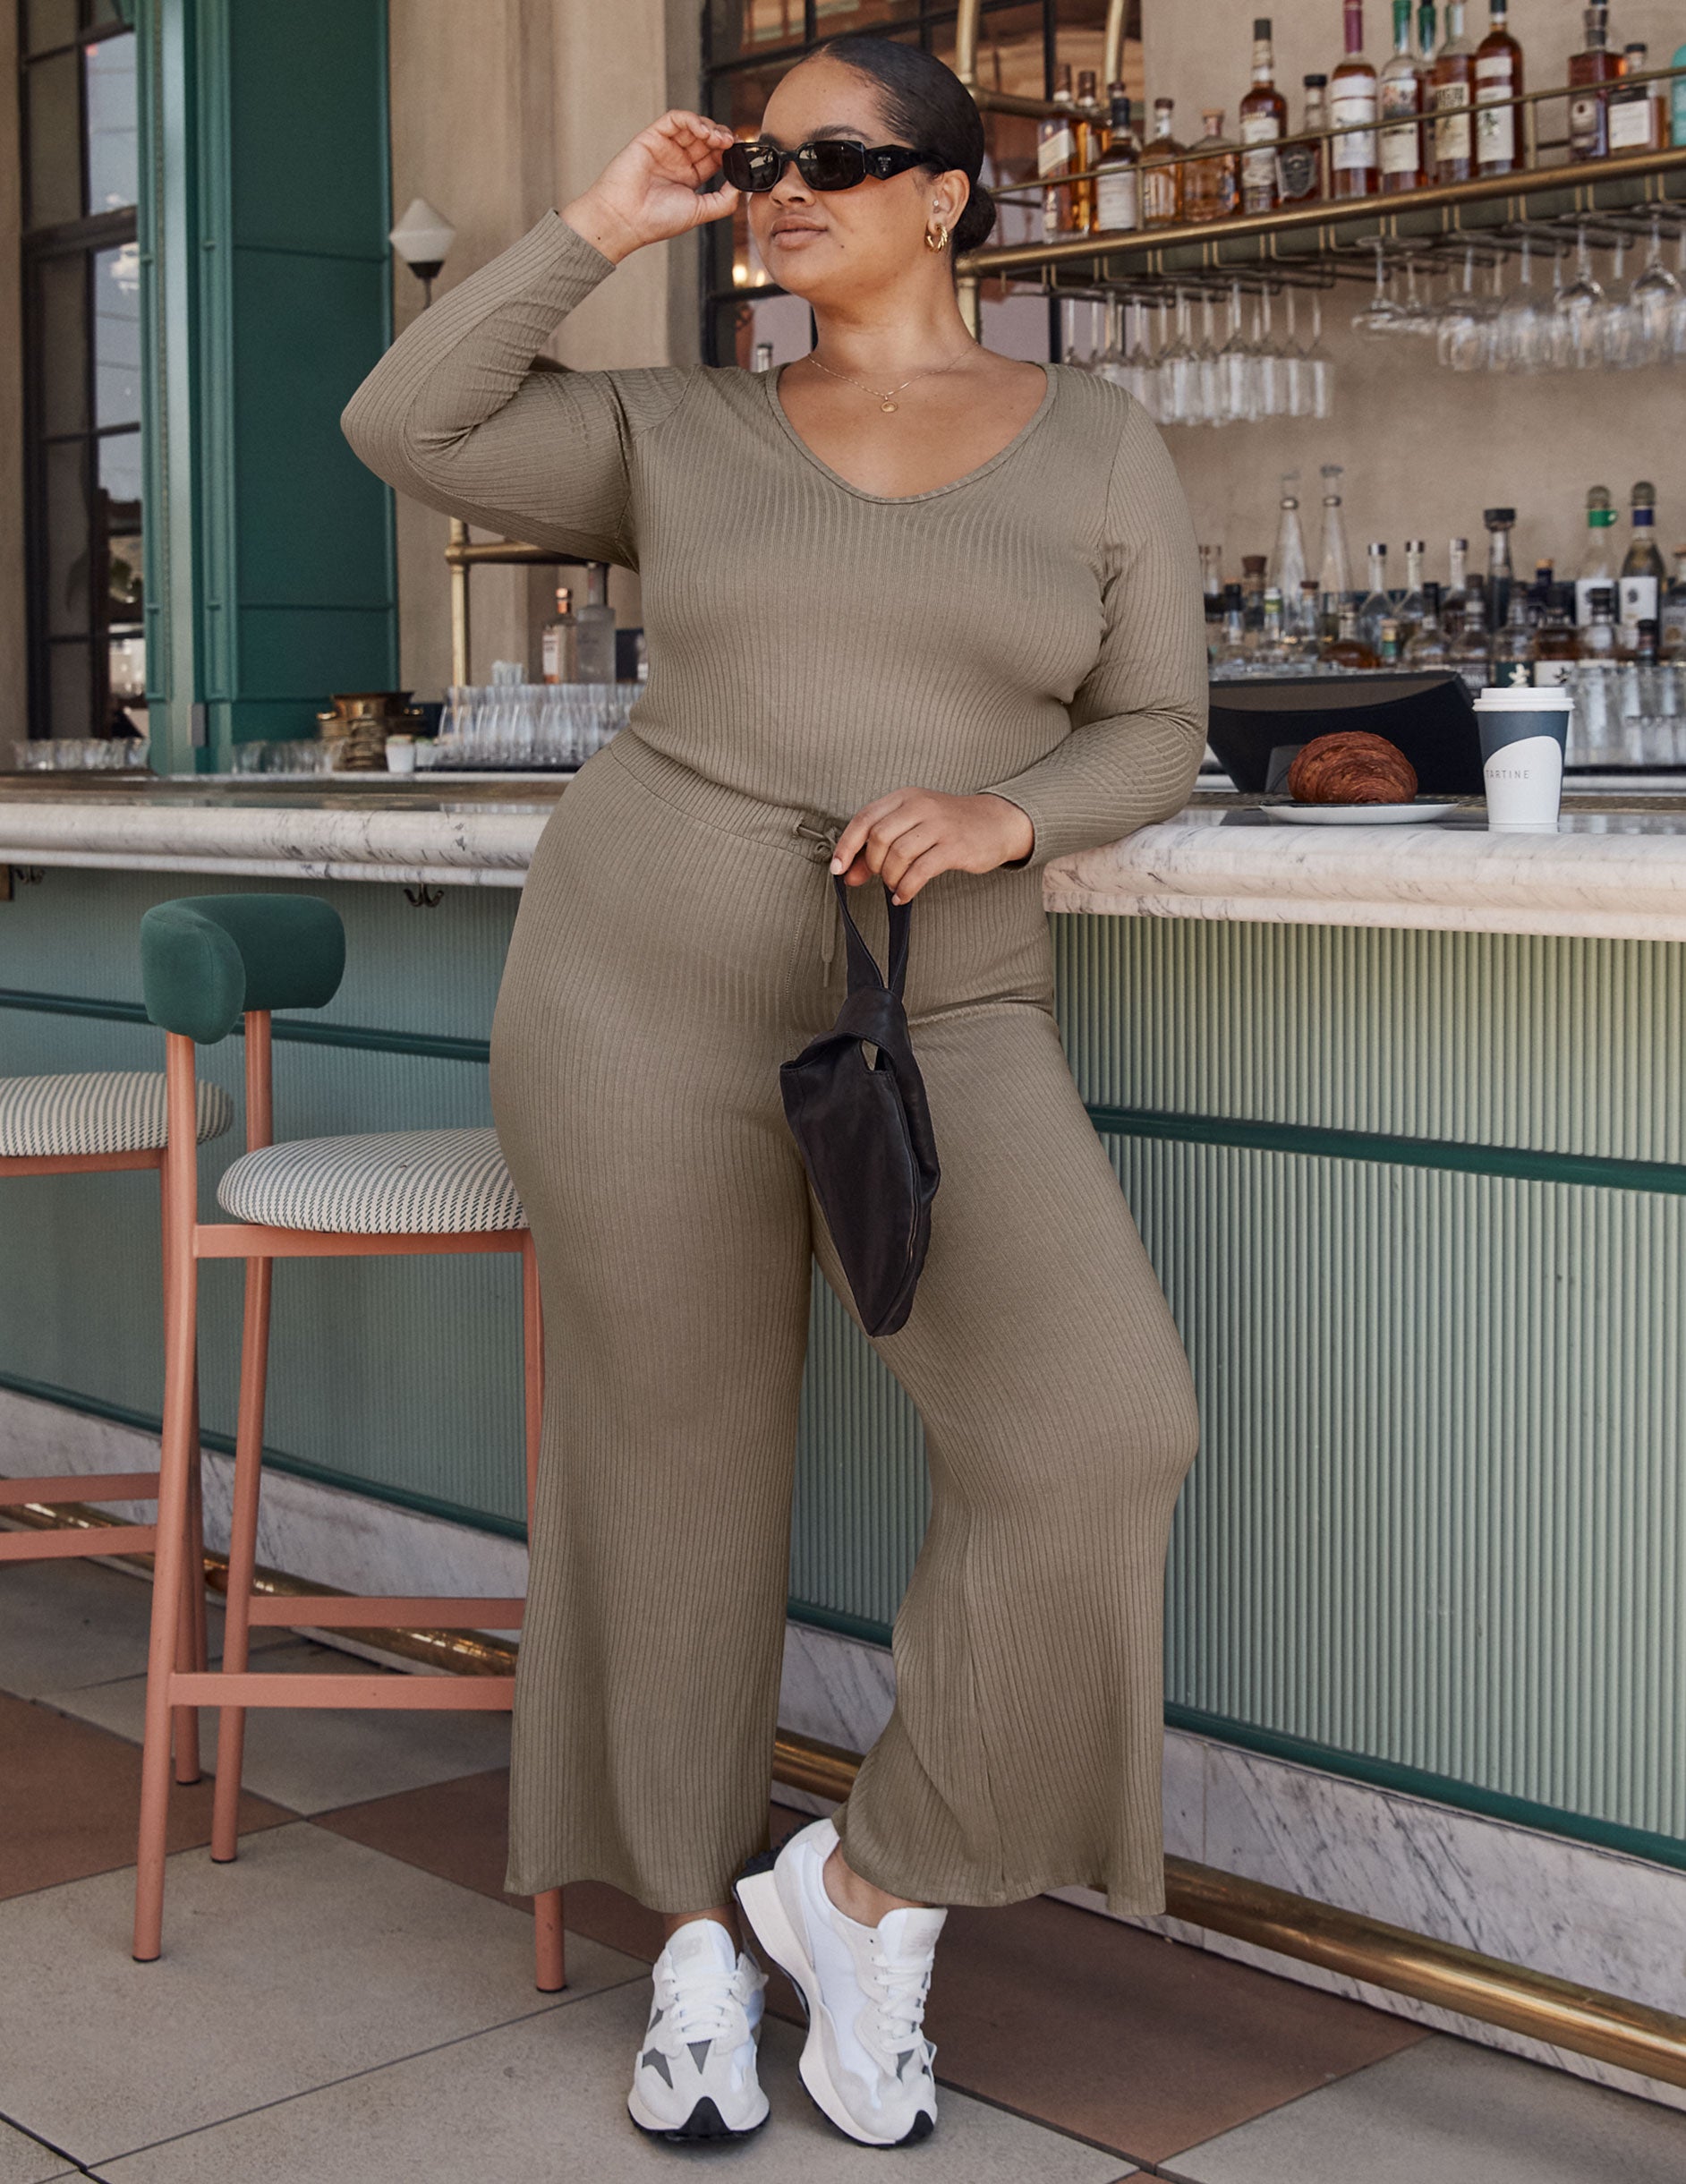 brown v-neck ribbed long sleeve jumpsuit with a drawstring at the waistband. 